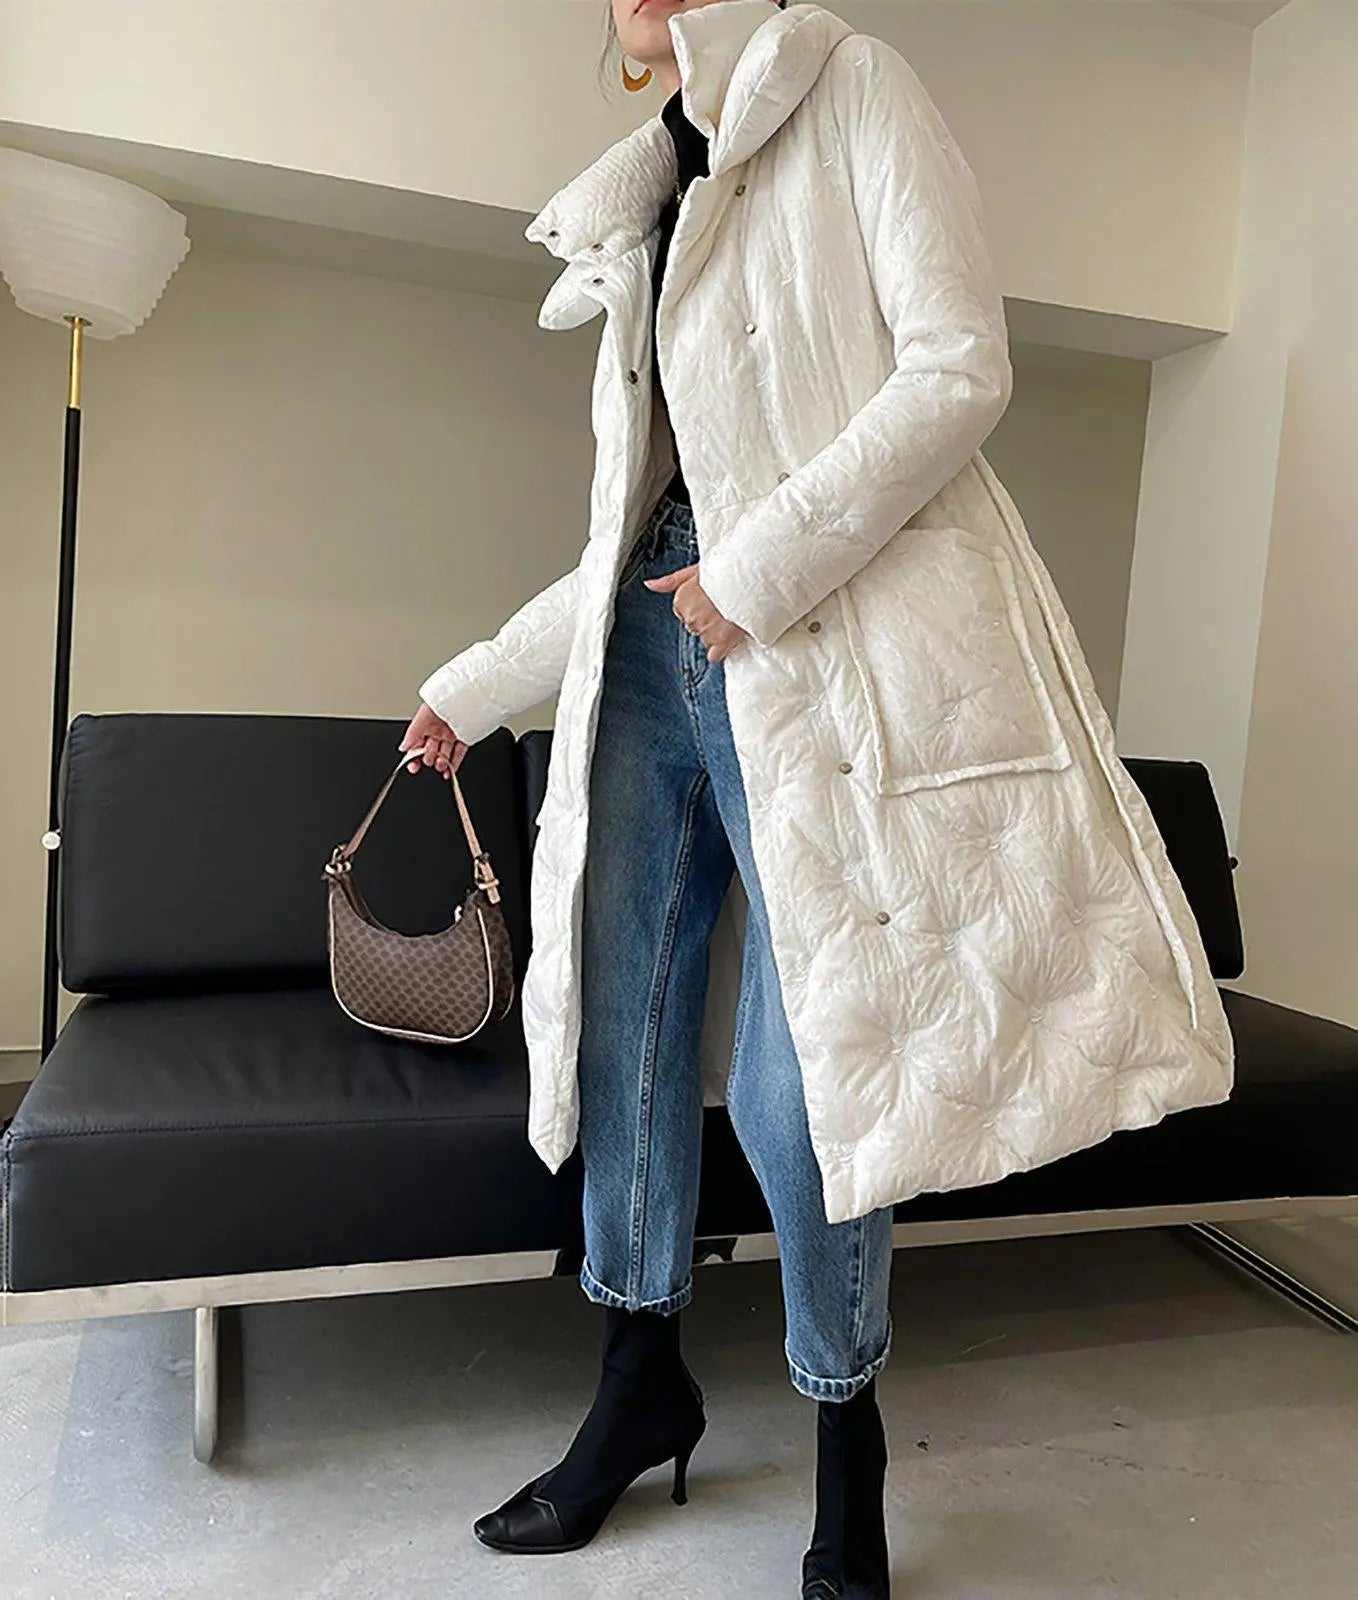 White embroidery Down Coat,Belted Down Feather Puffer Coat,White Long Down Jacket,Warm Winter coat,Warm Puffy Coat,Down Jacket,Vivian7 C106 Vivian Seven